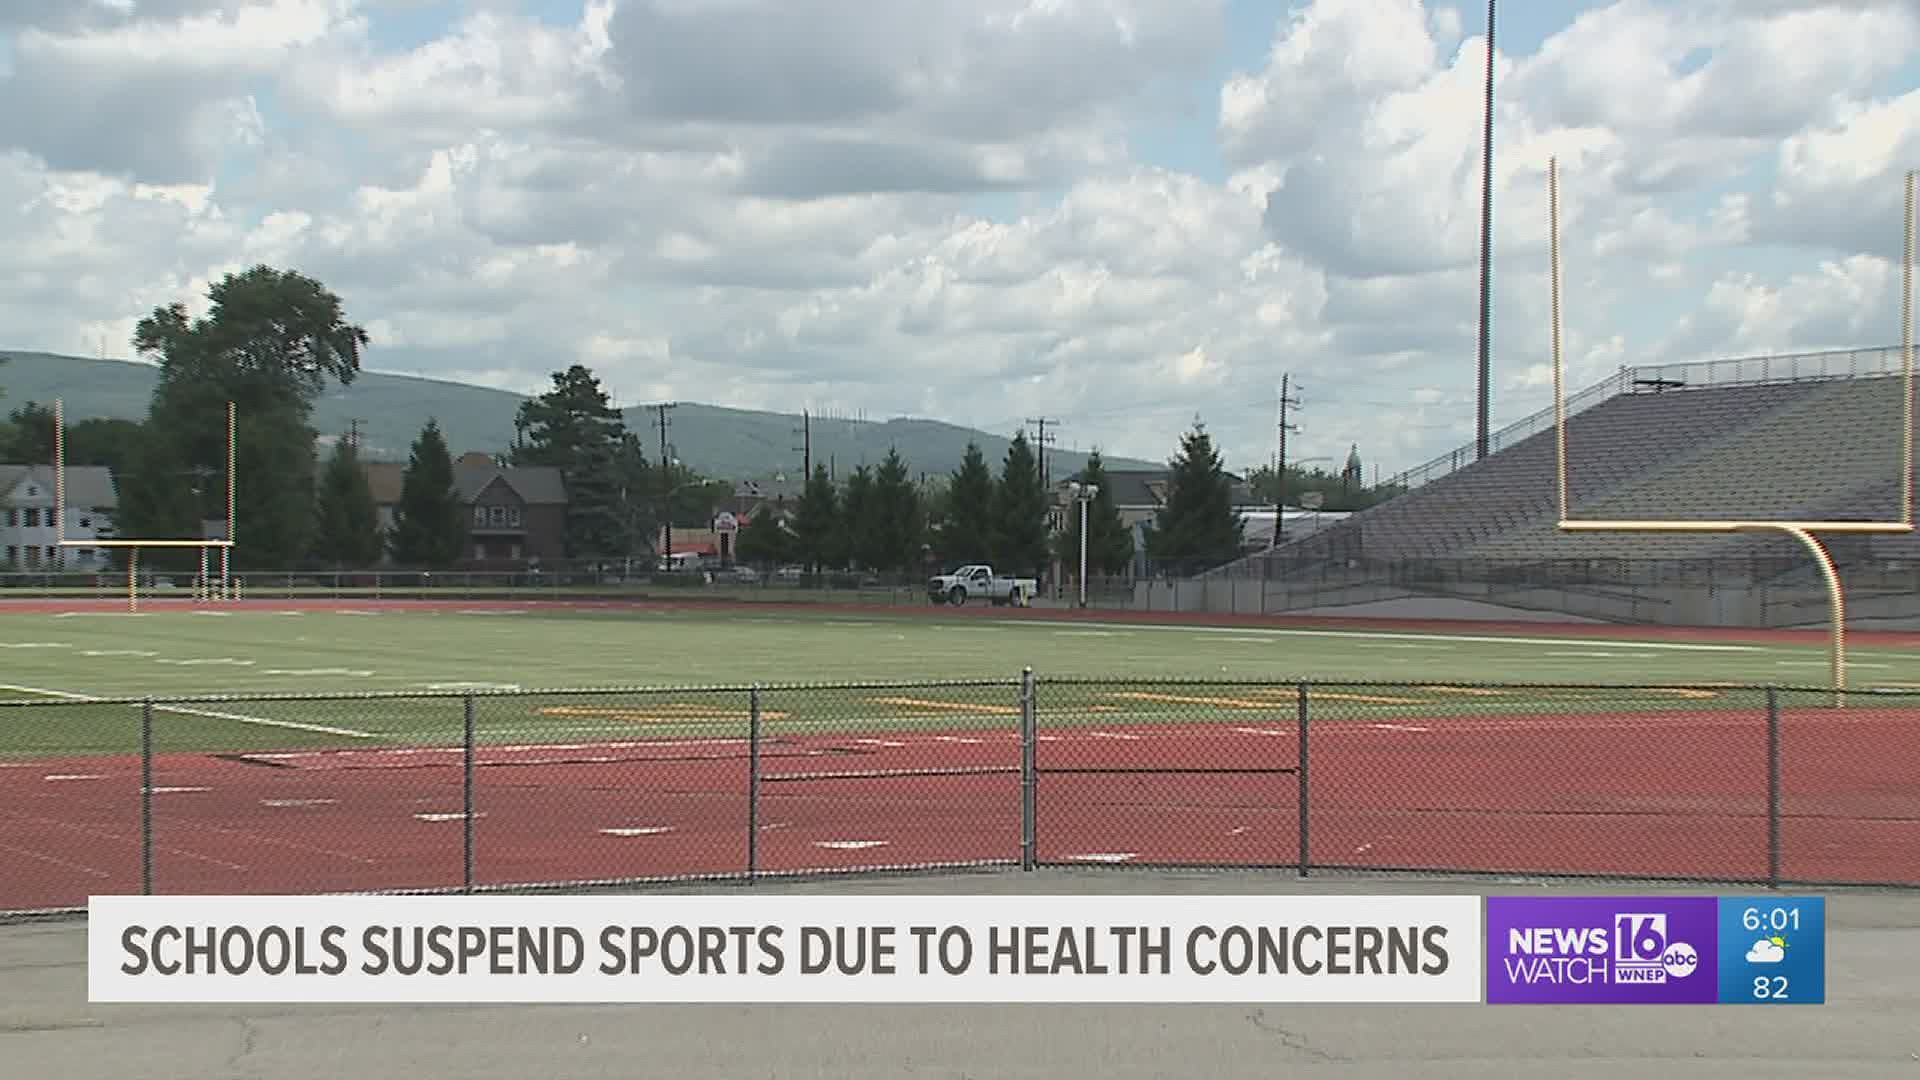 Scranton and Old Forge School Districts have decided to temporarily halt athletics and extracurricular activities until further notice.